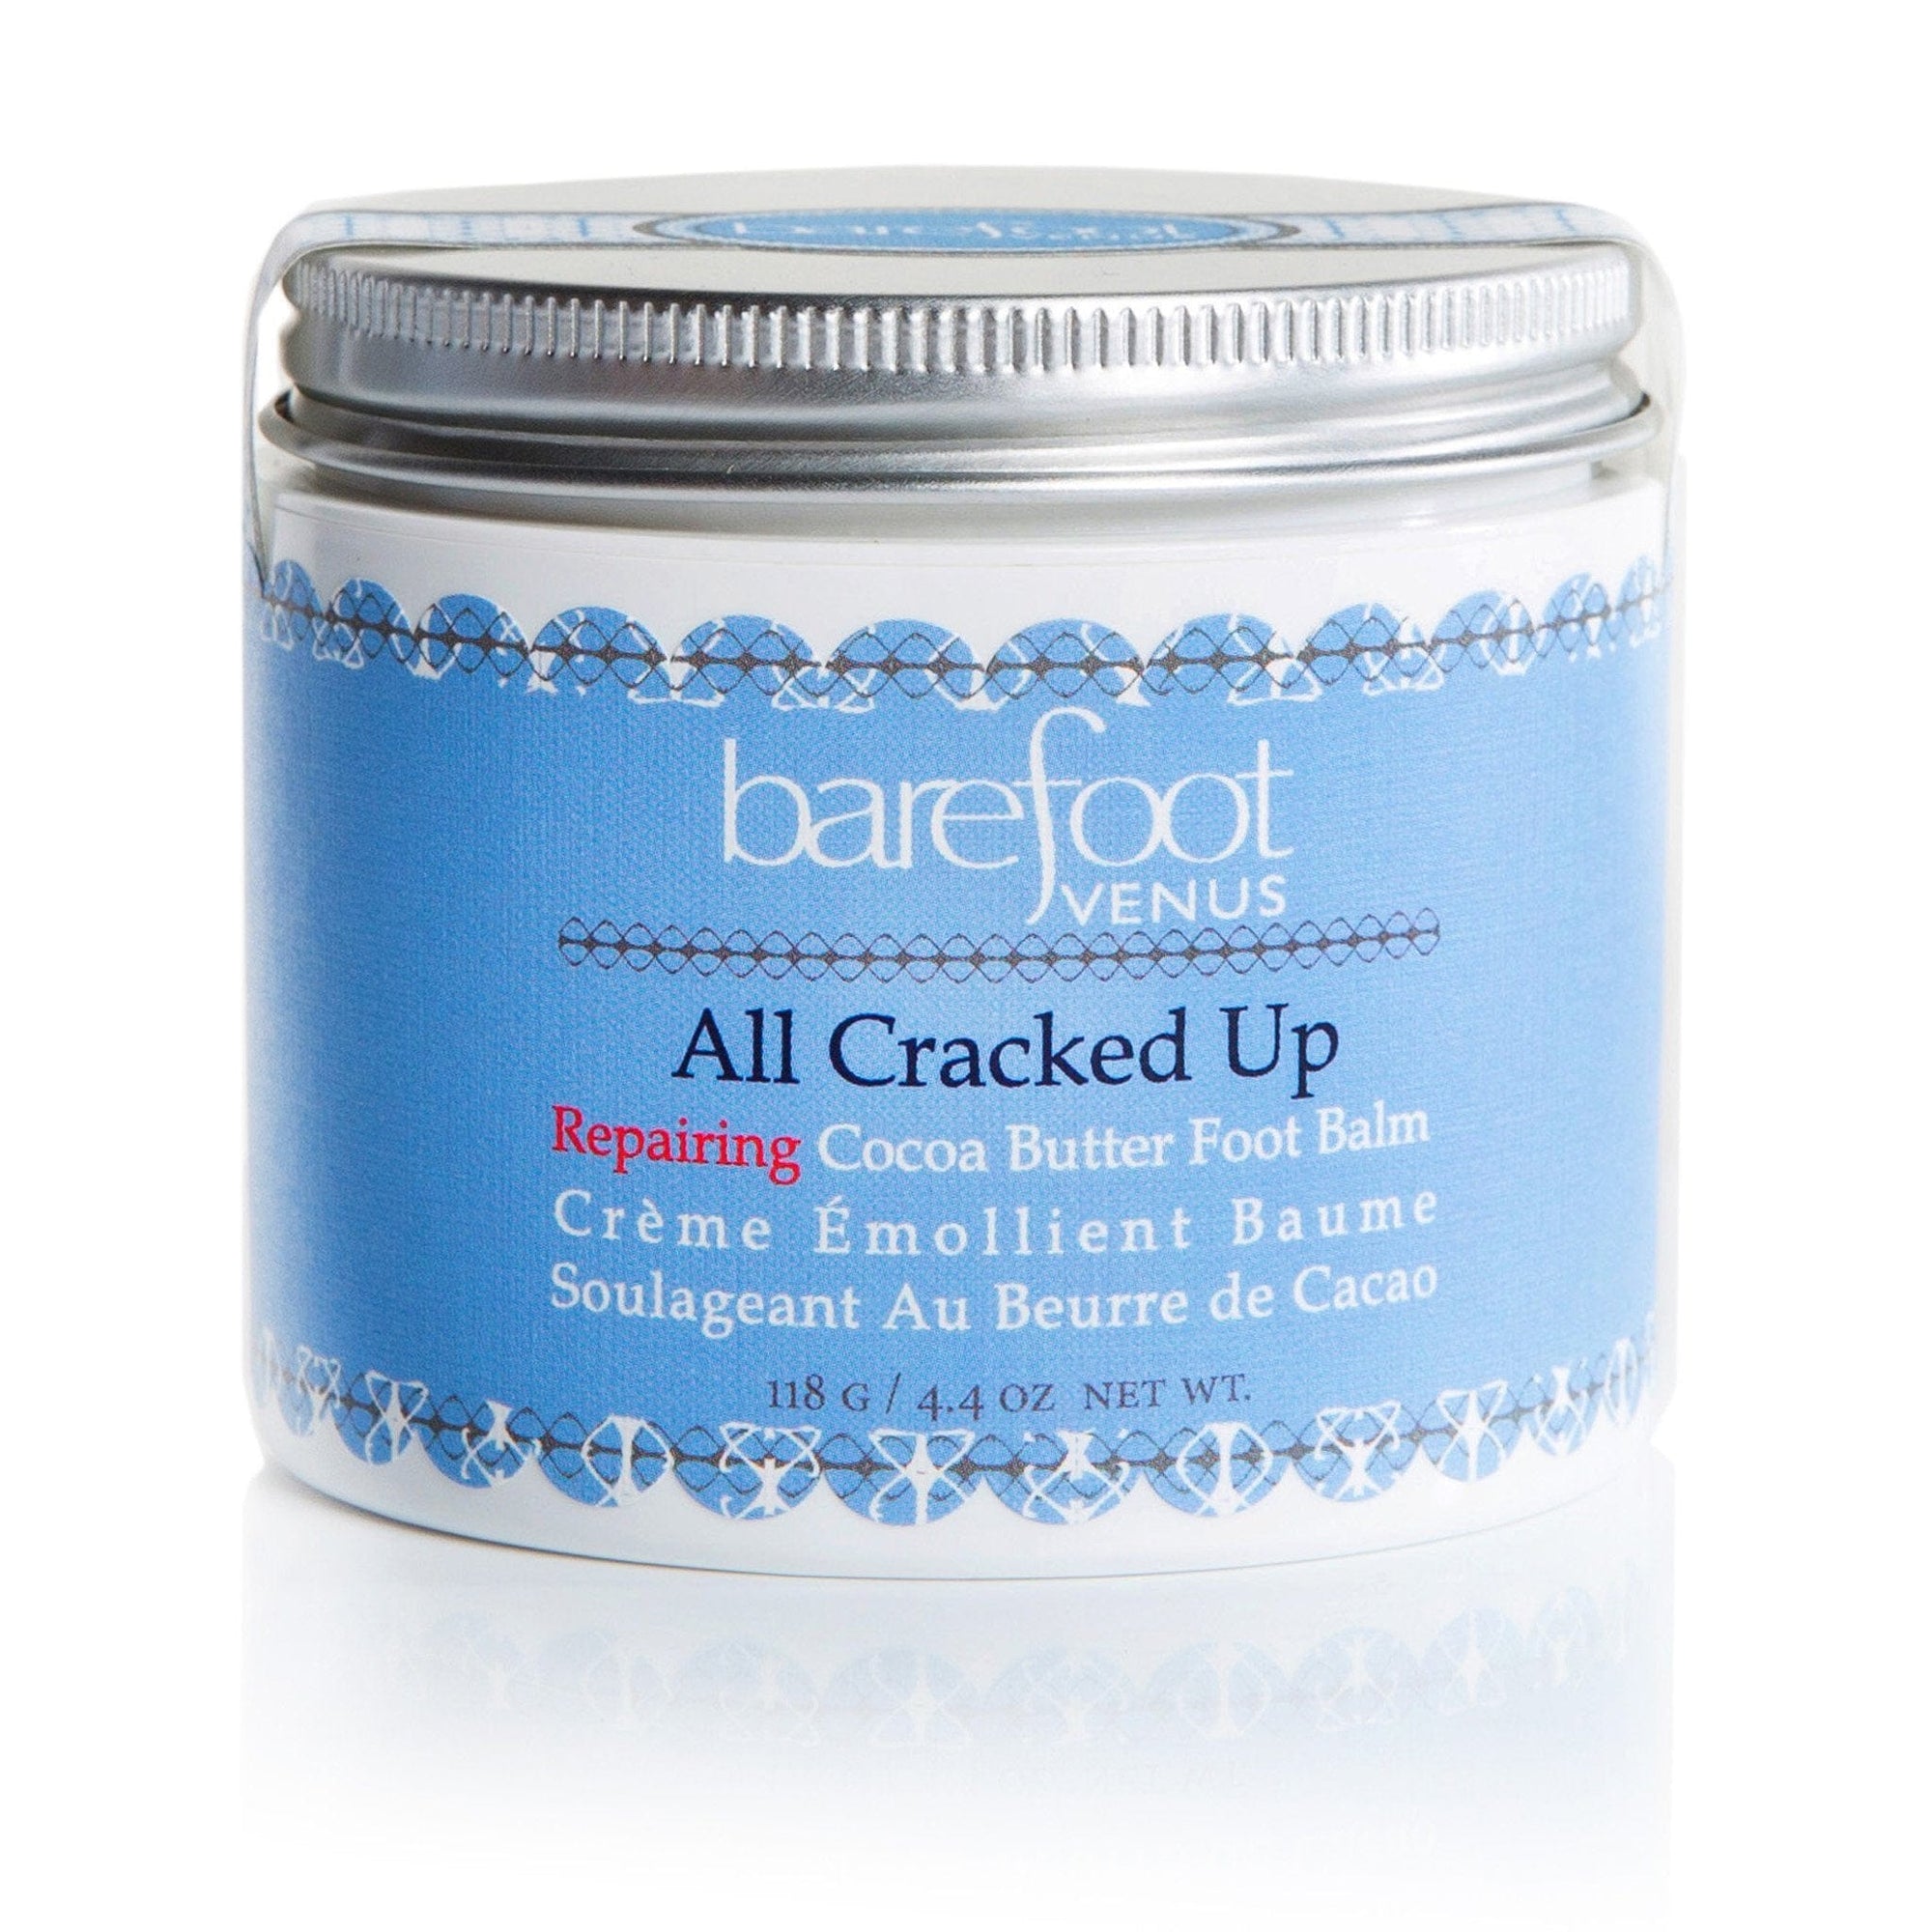 All Cracked Up Foot Balm REPAIRING COCOA BUTTER. Barefoot Venus